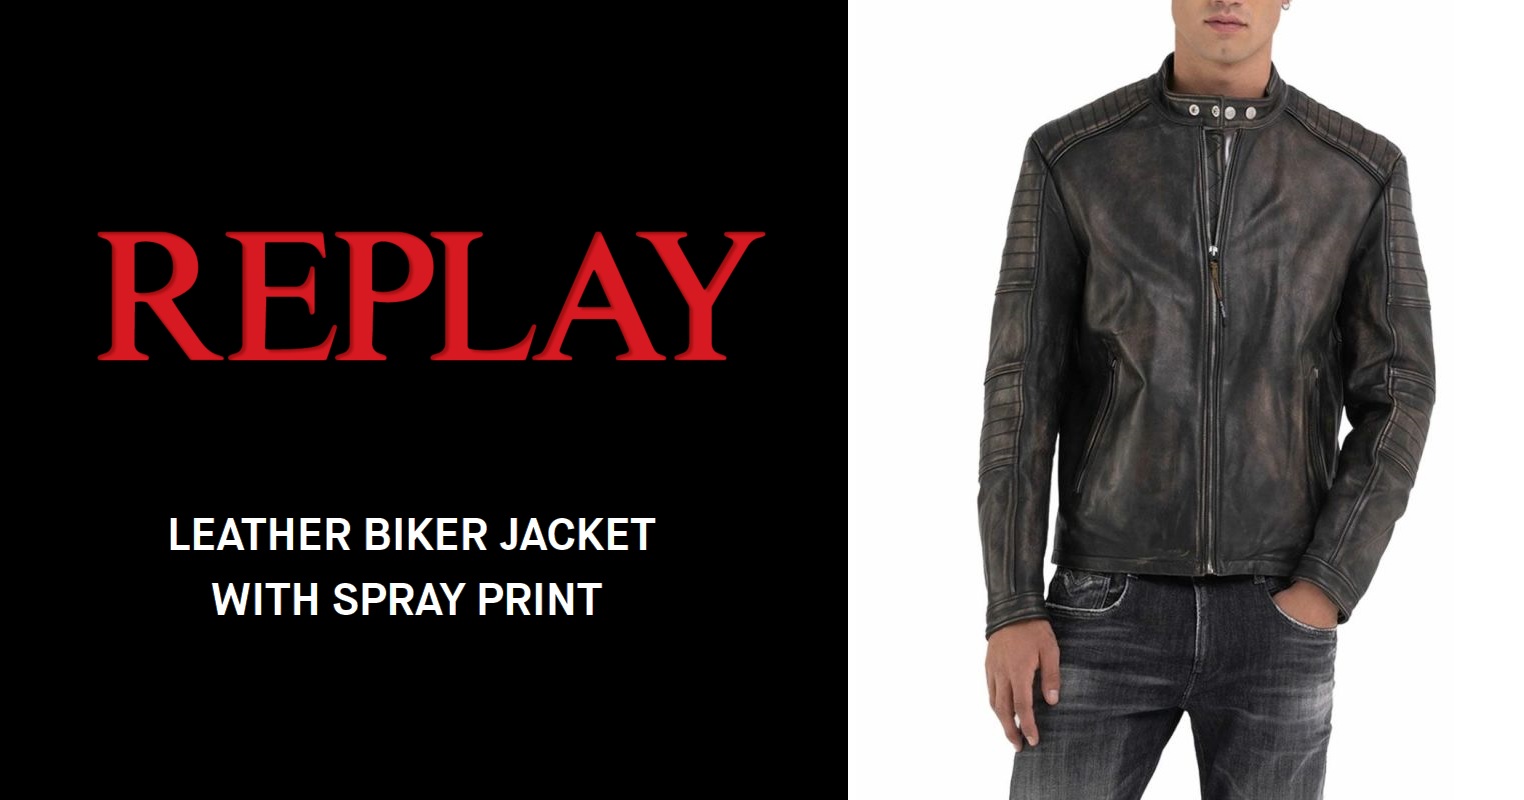 REPLAY | LEATHER BIKER JACKET WITH SPRAY PRINT が入荷してきました。